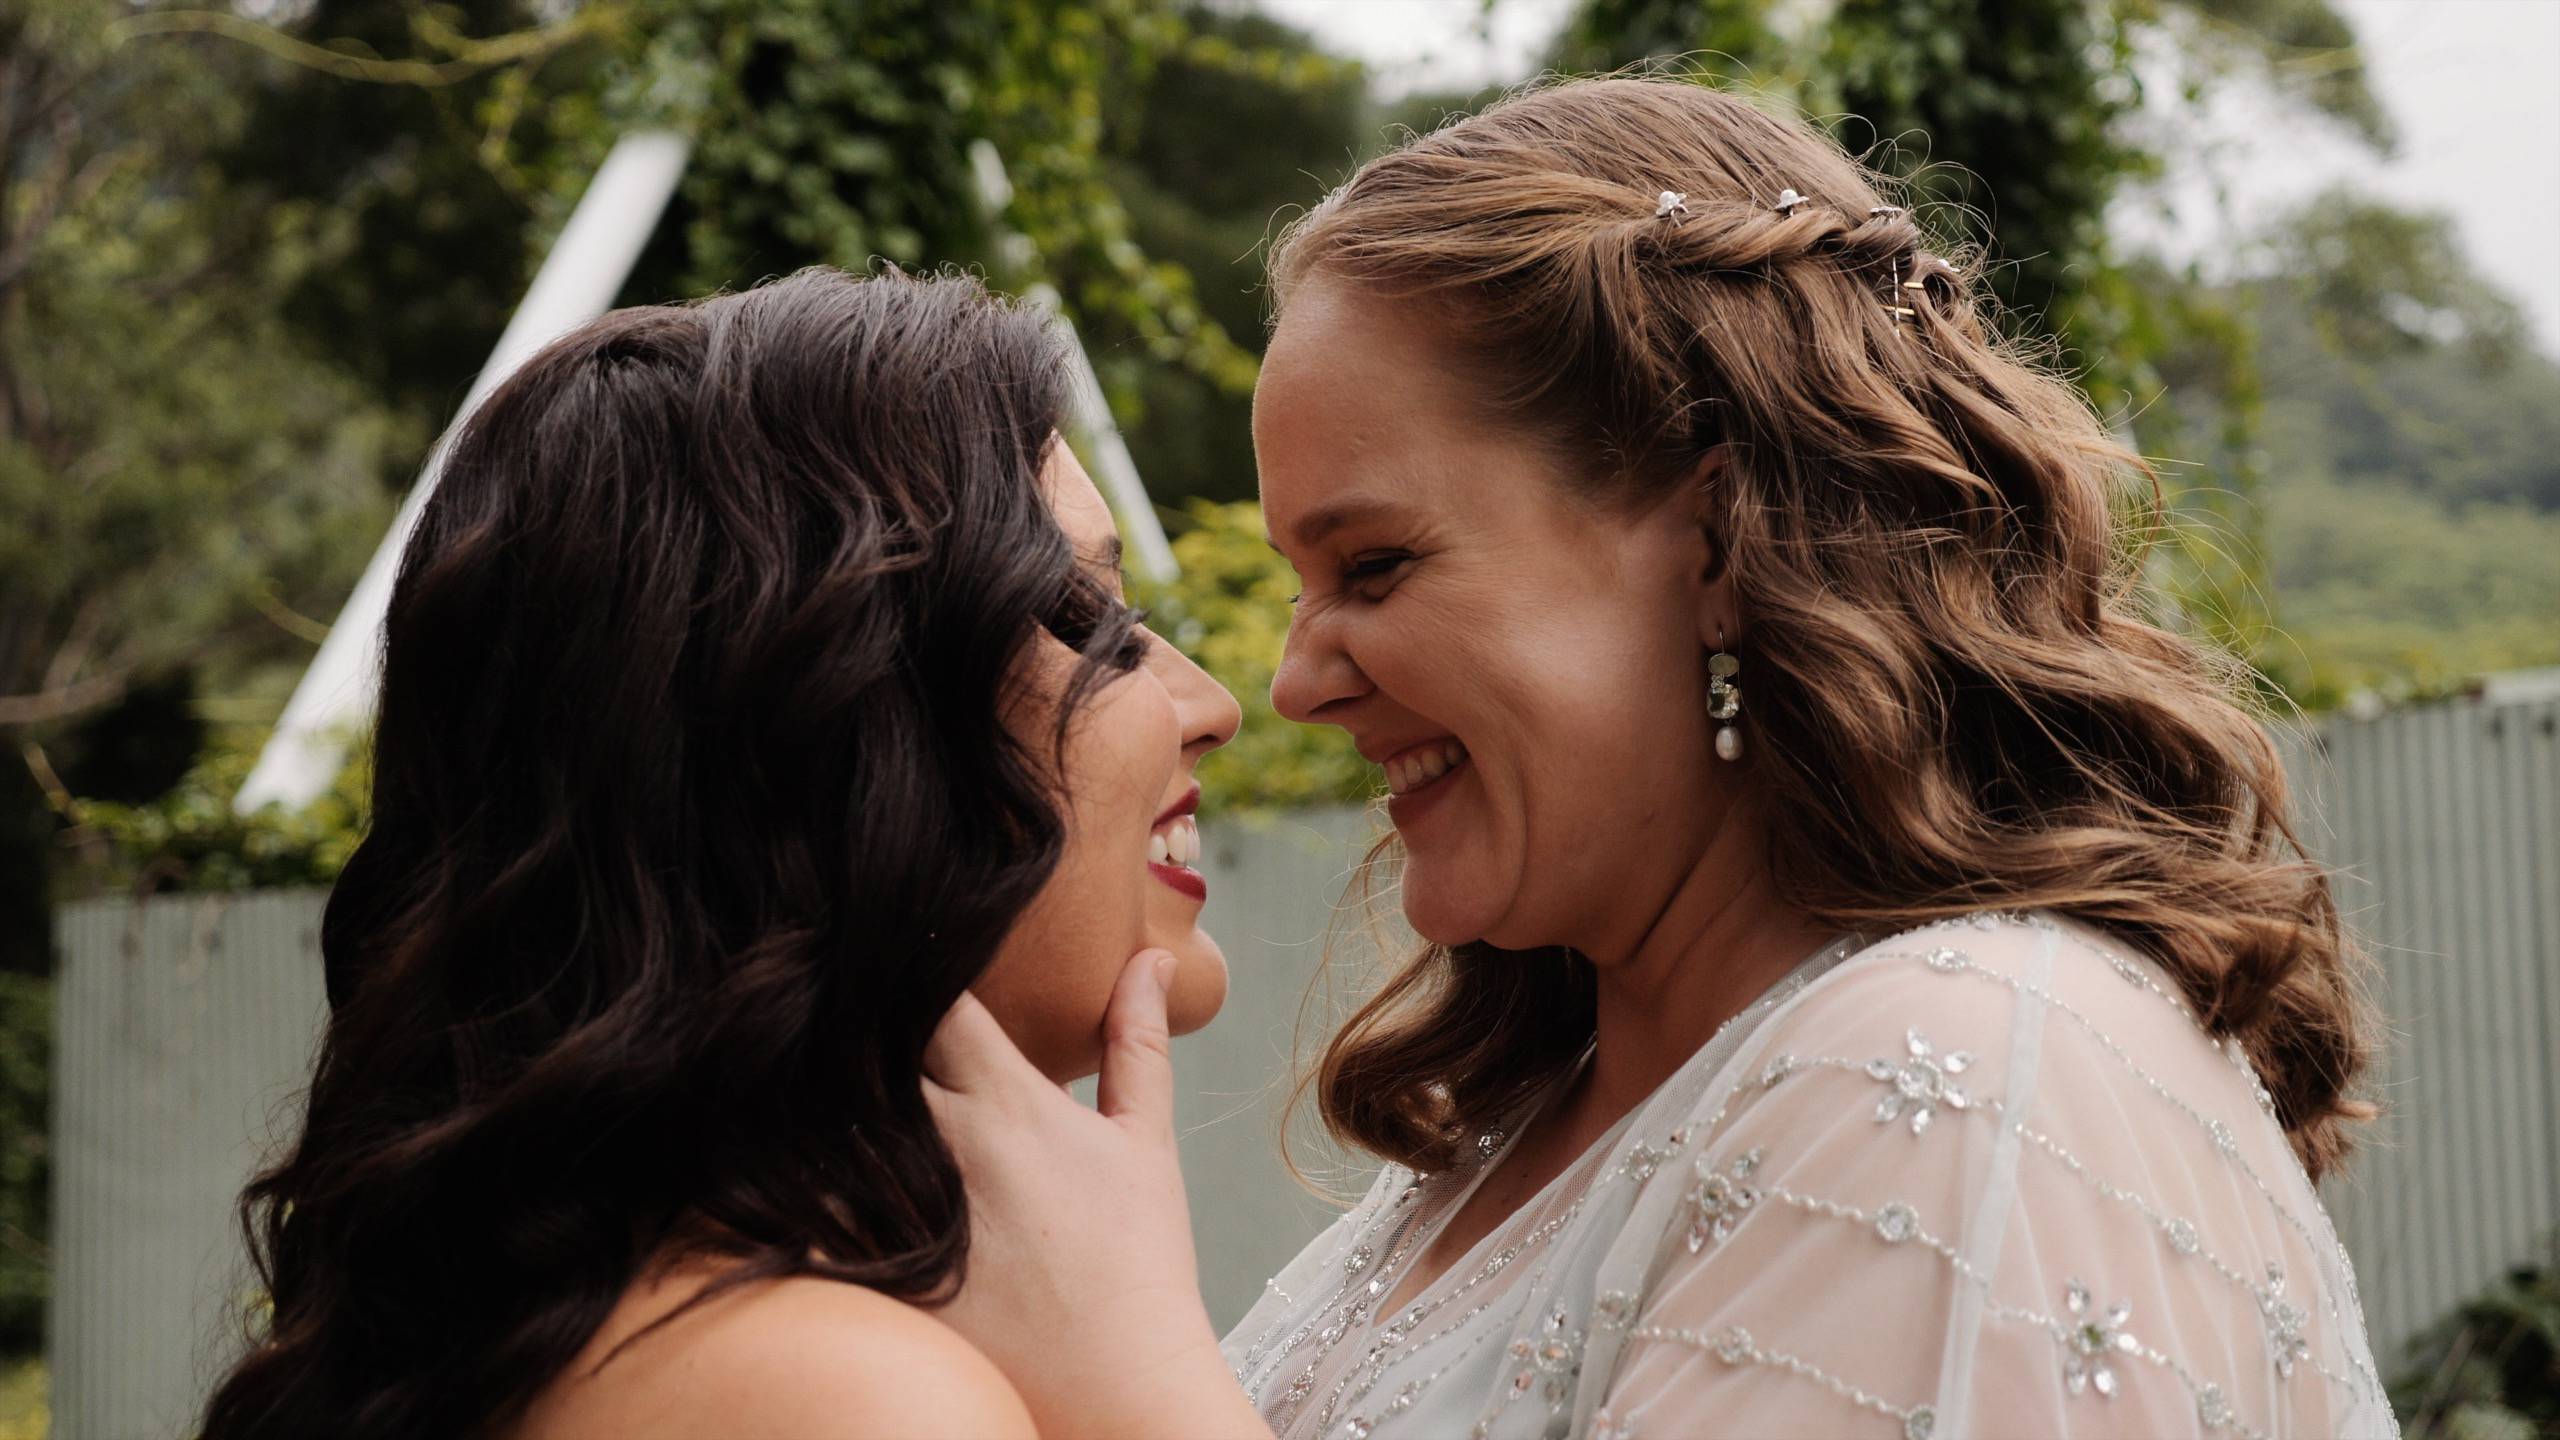 Jessica + Julie Highlight Film // Ruby's Mount Kembla // Wollongong Wedding Videography